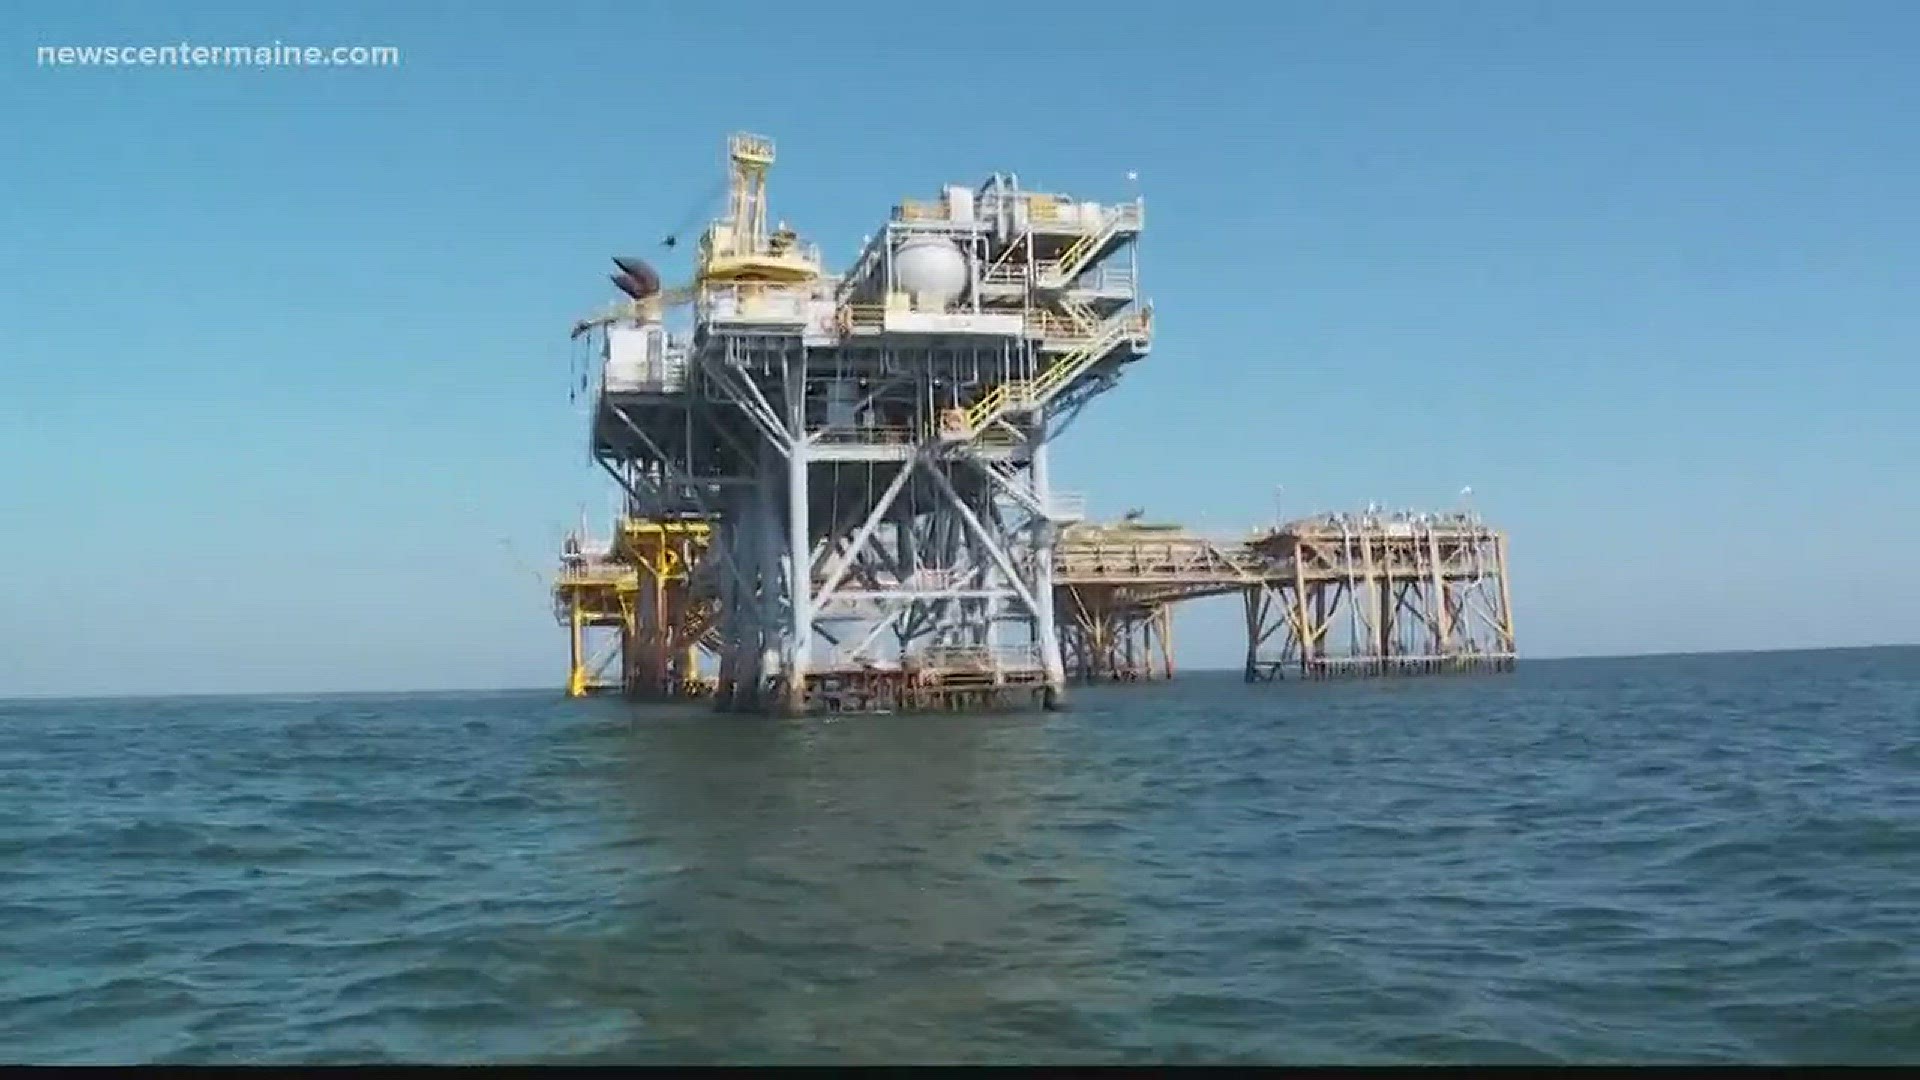 Public meeting scheduled about offshore drilling